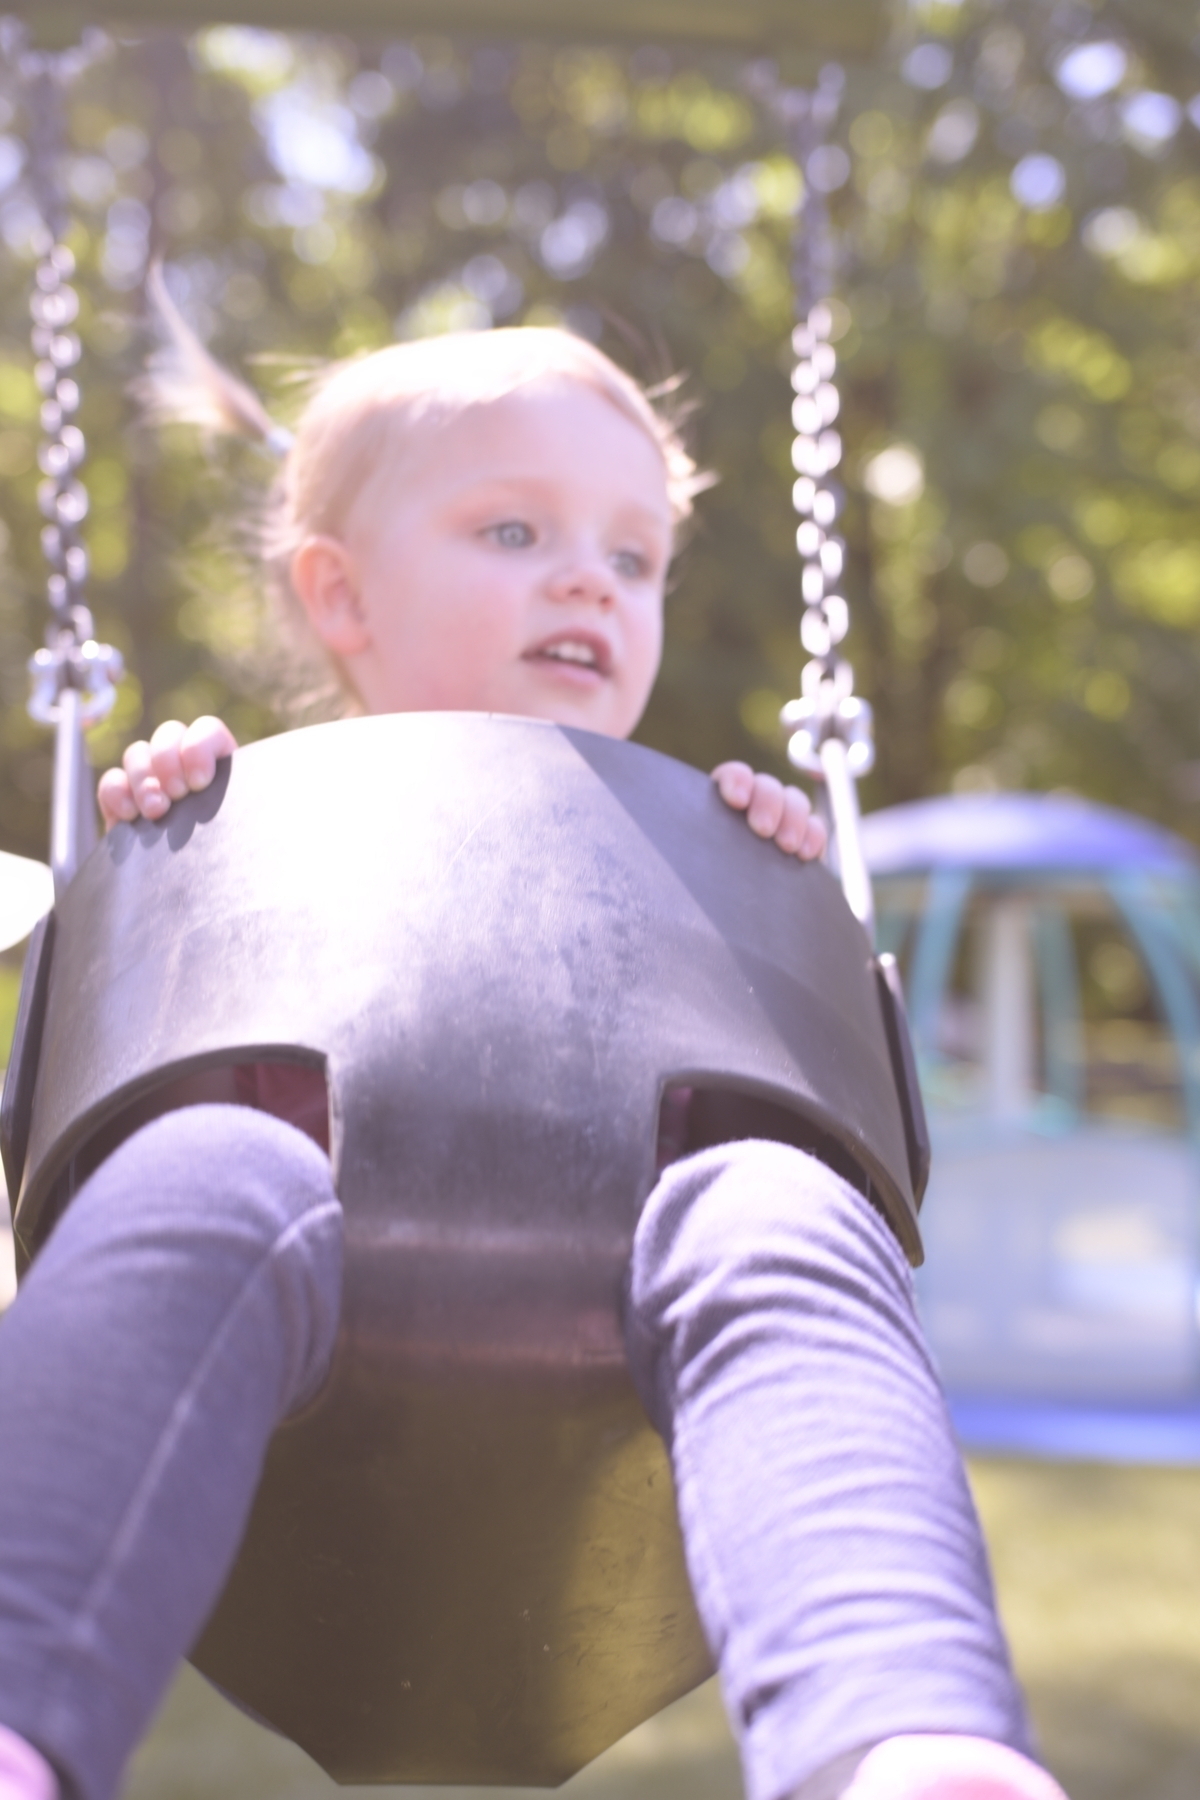 A young child with light hair is sitting in a swing, holding onto the sides, with a blurred background of greenery and playground equipment.